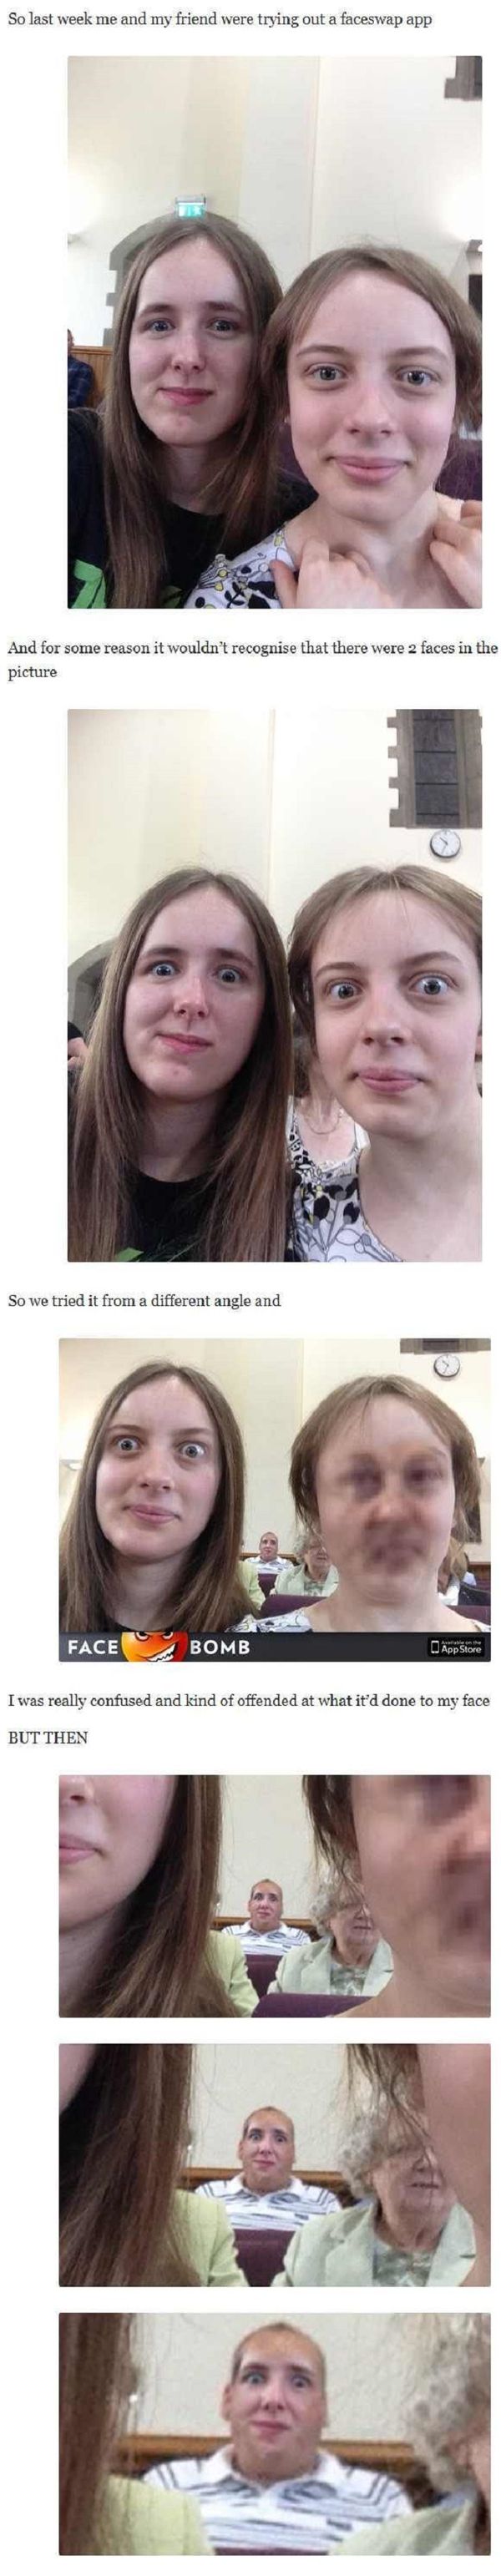 So last week me and my friend were trying out a faceswap app
 And for some reason it wouldn't recognise that there were 2 faces in the picture
 So we tried it from a different angle